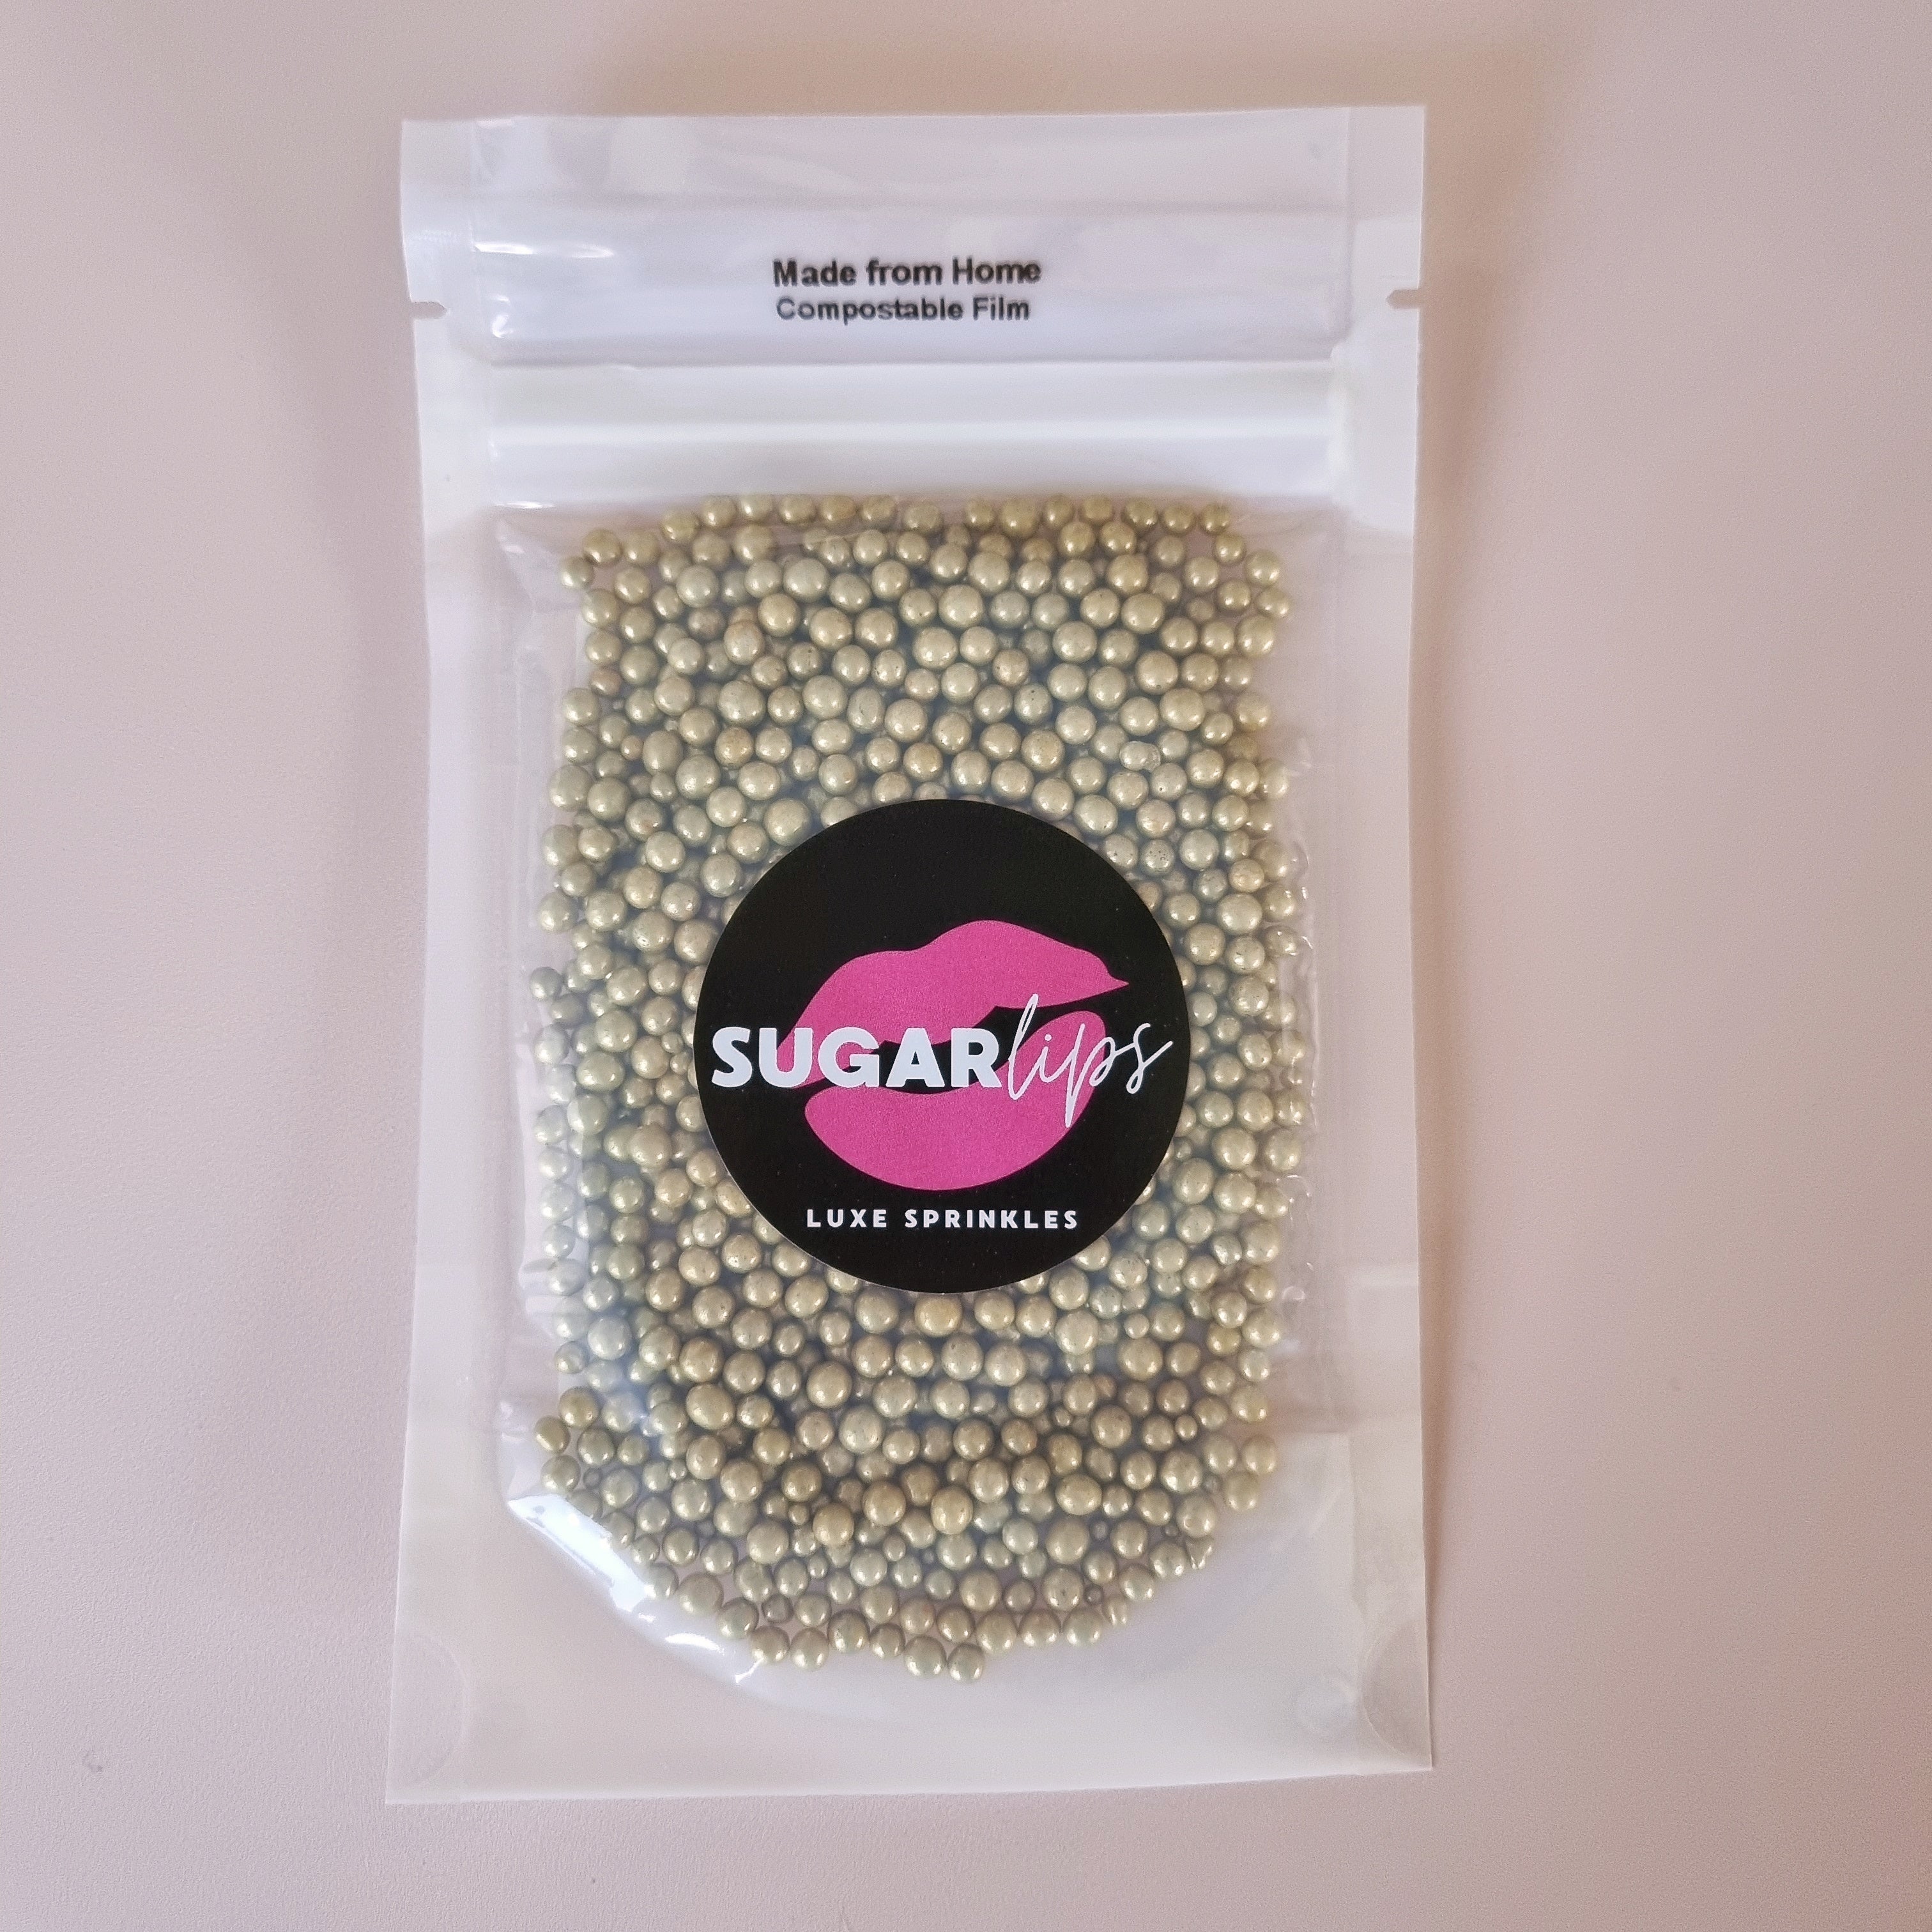 METALLIC GOLD 4mm EDIBLE CACHOUS PEARLS - 1KG BA8401  Ultimate Cake Group  - Wholesale Cake Decorating Supplies